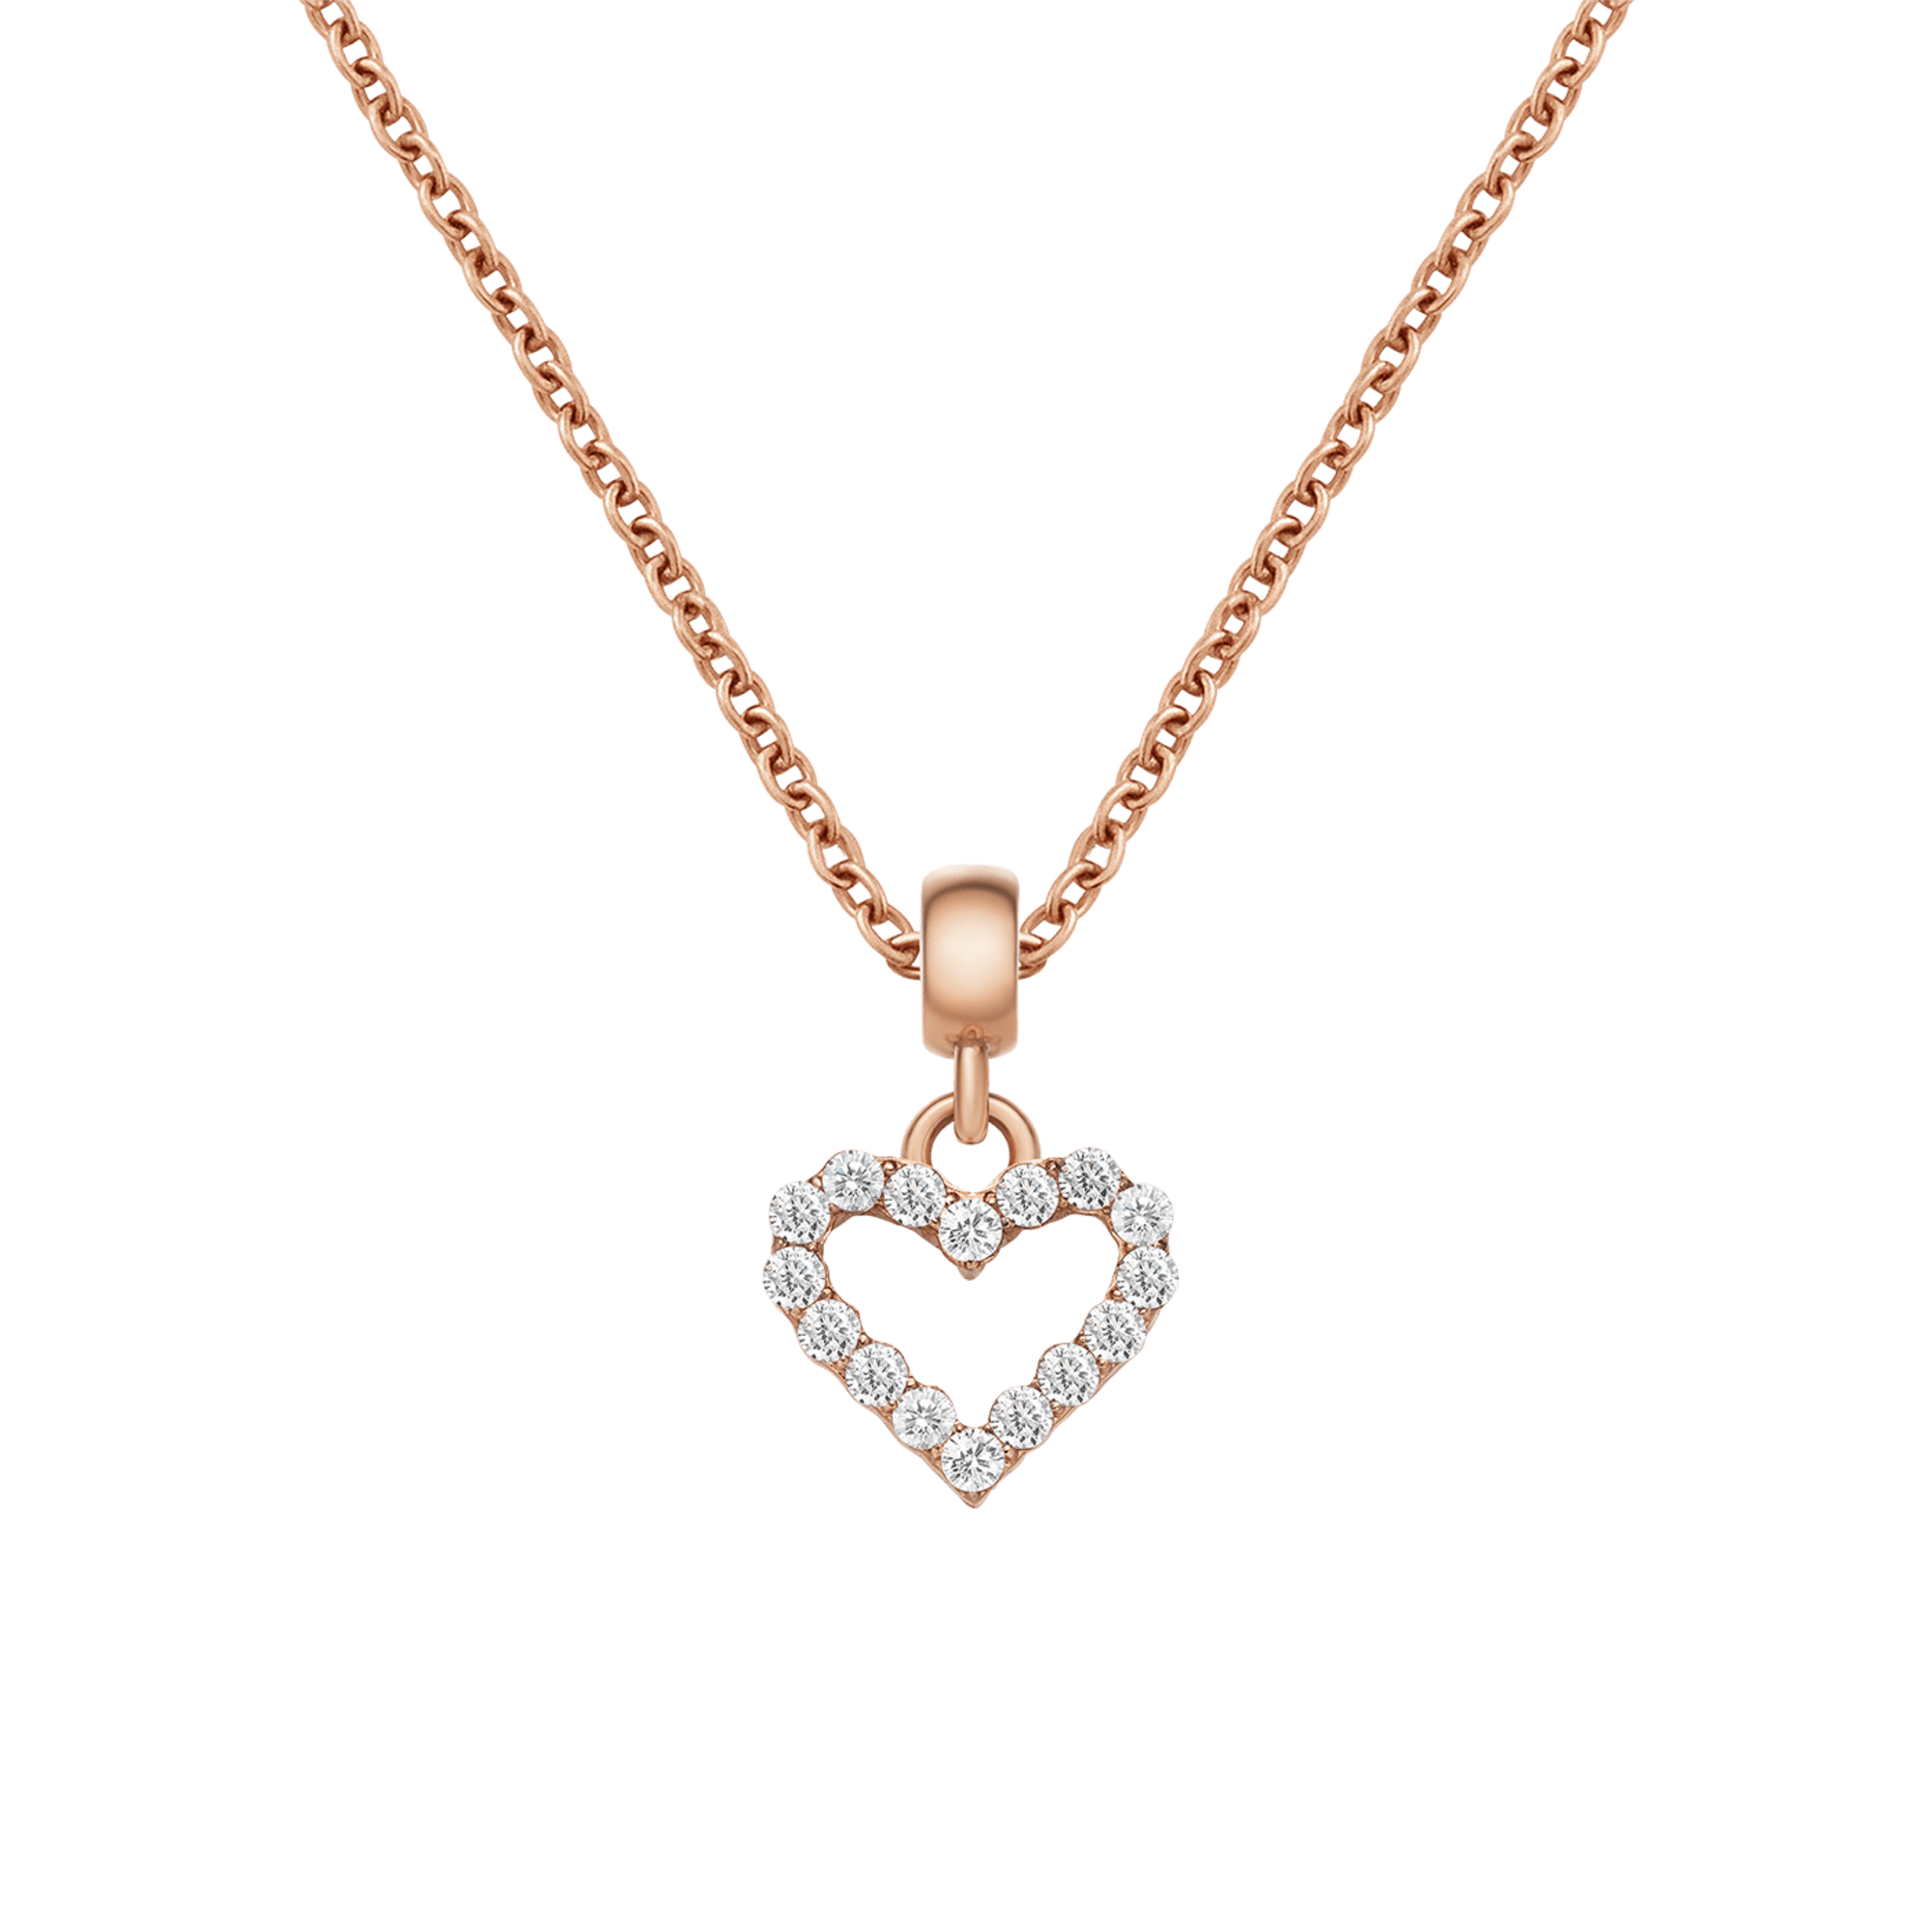 Chain Necklace + Heart Contour White Crystal Charm